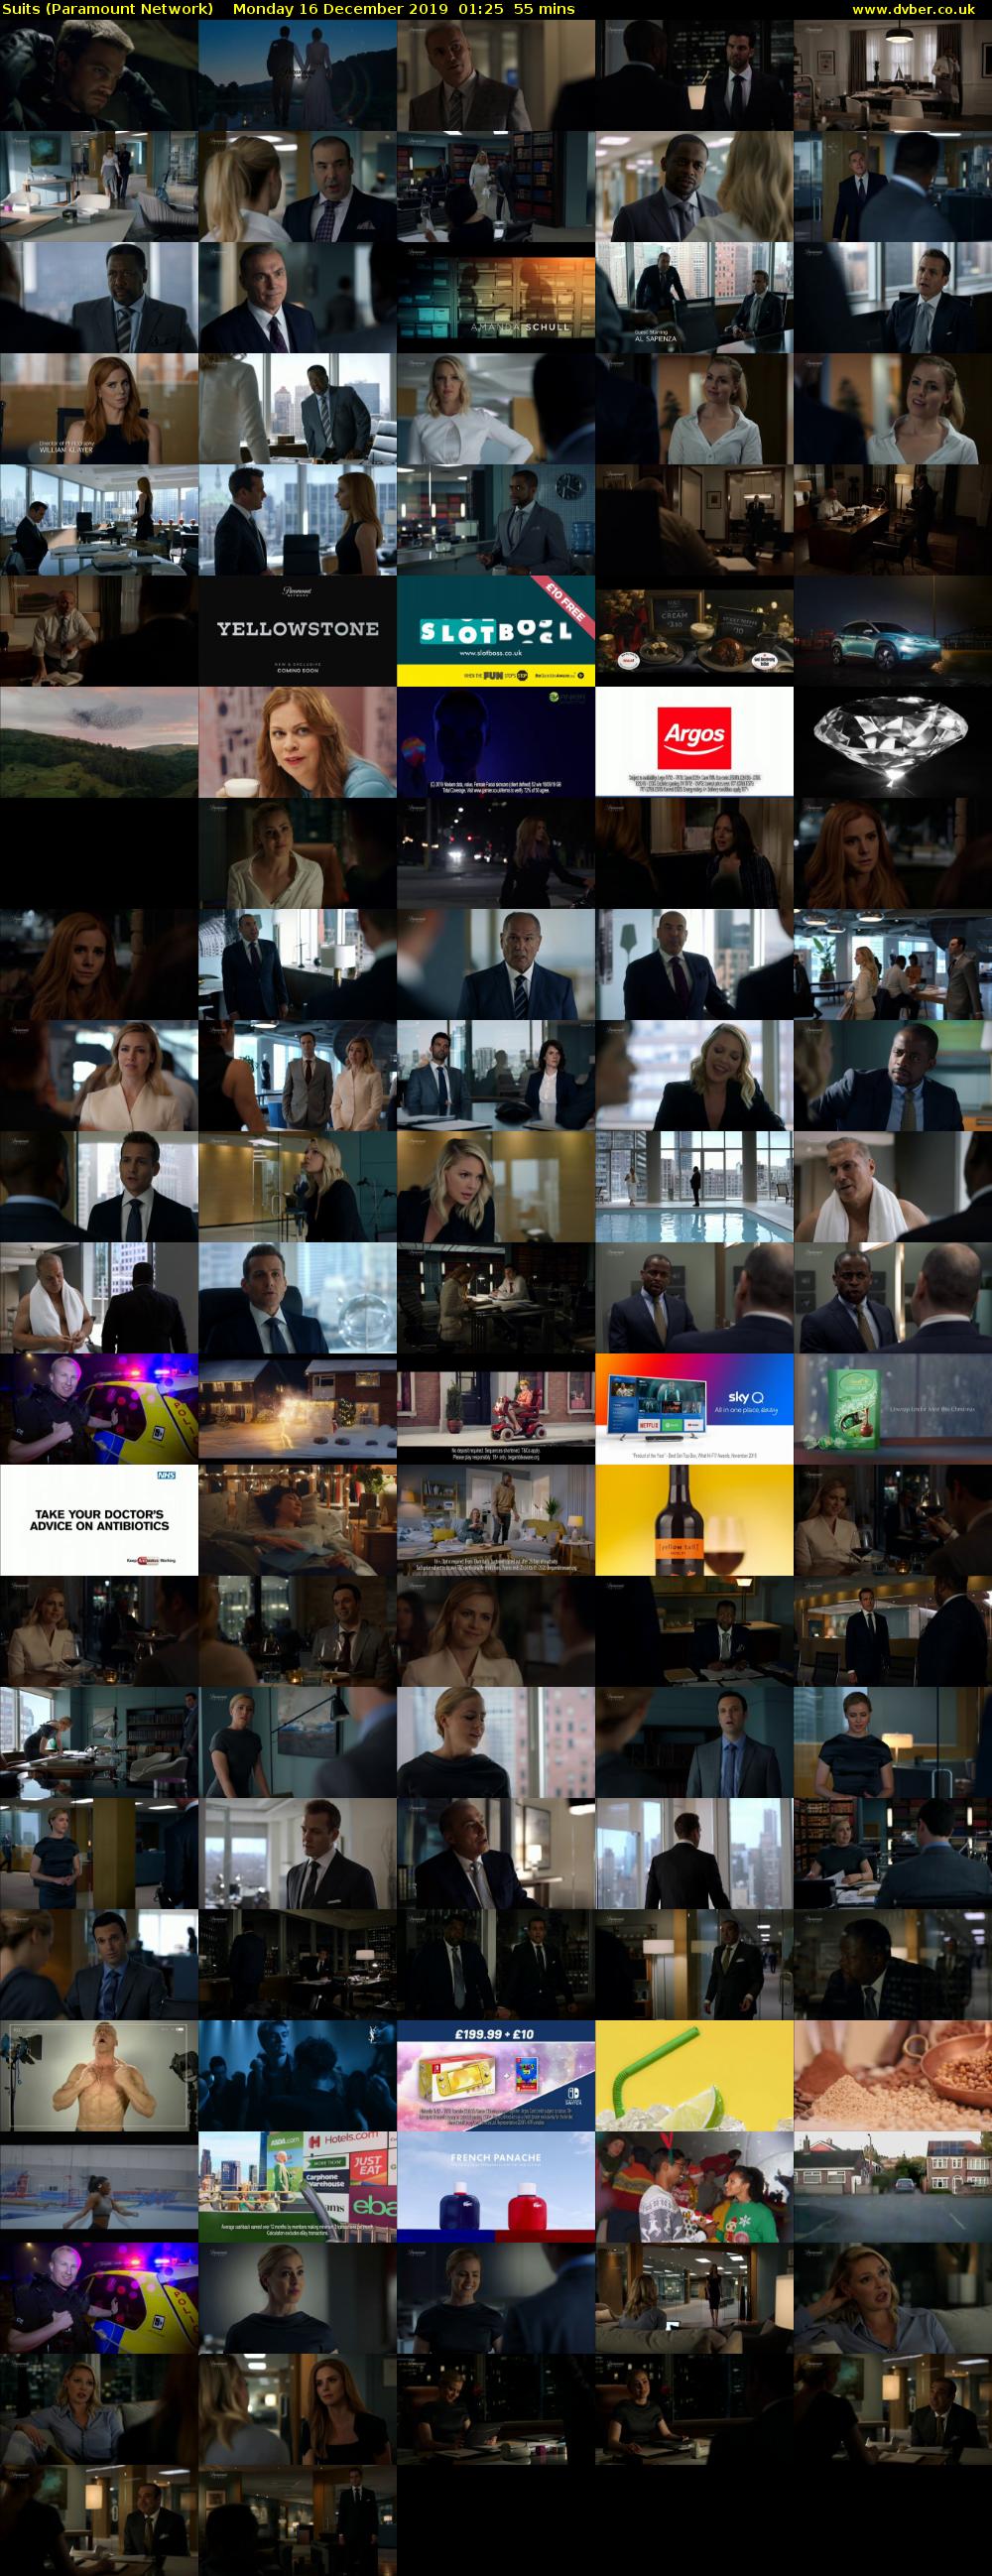 Suits (Paramount Network) Monday 16 December 2019 01:25 - 02:20